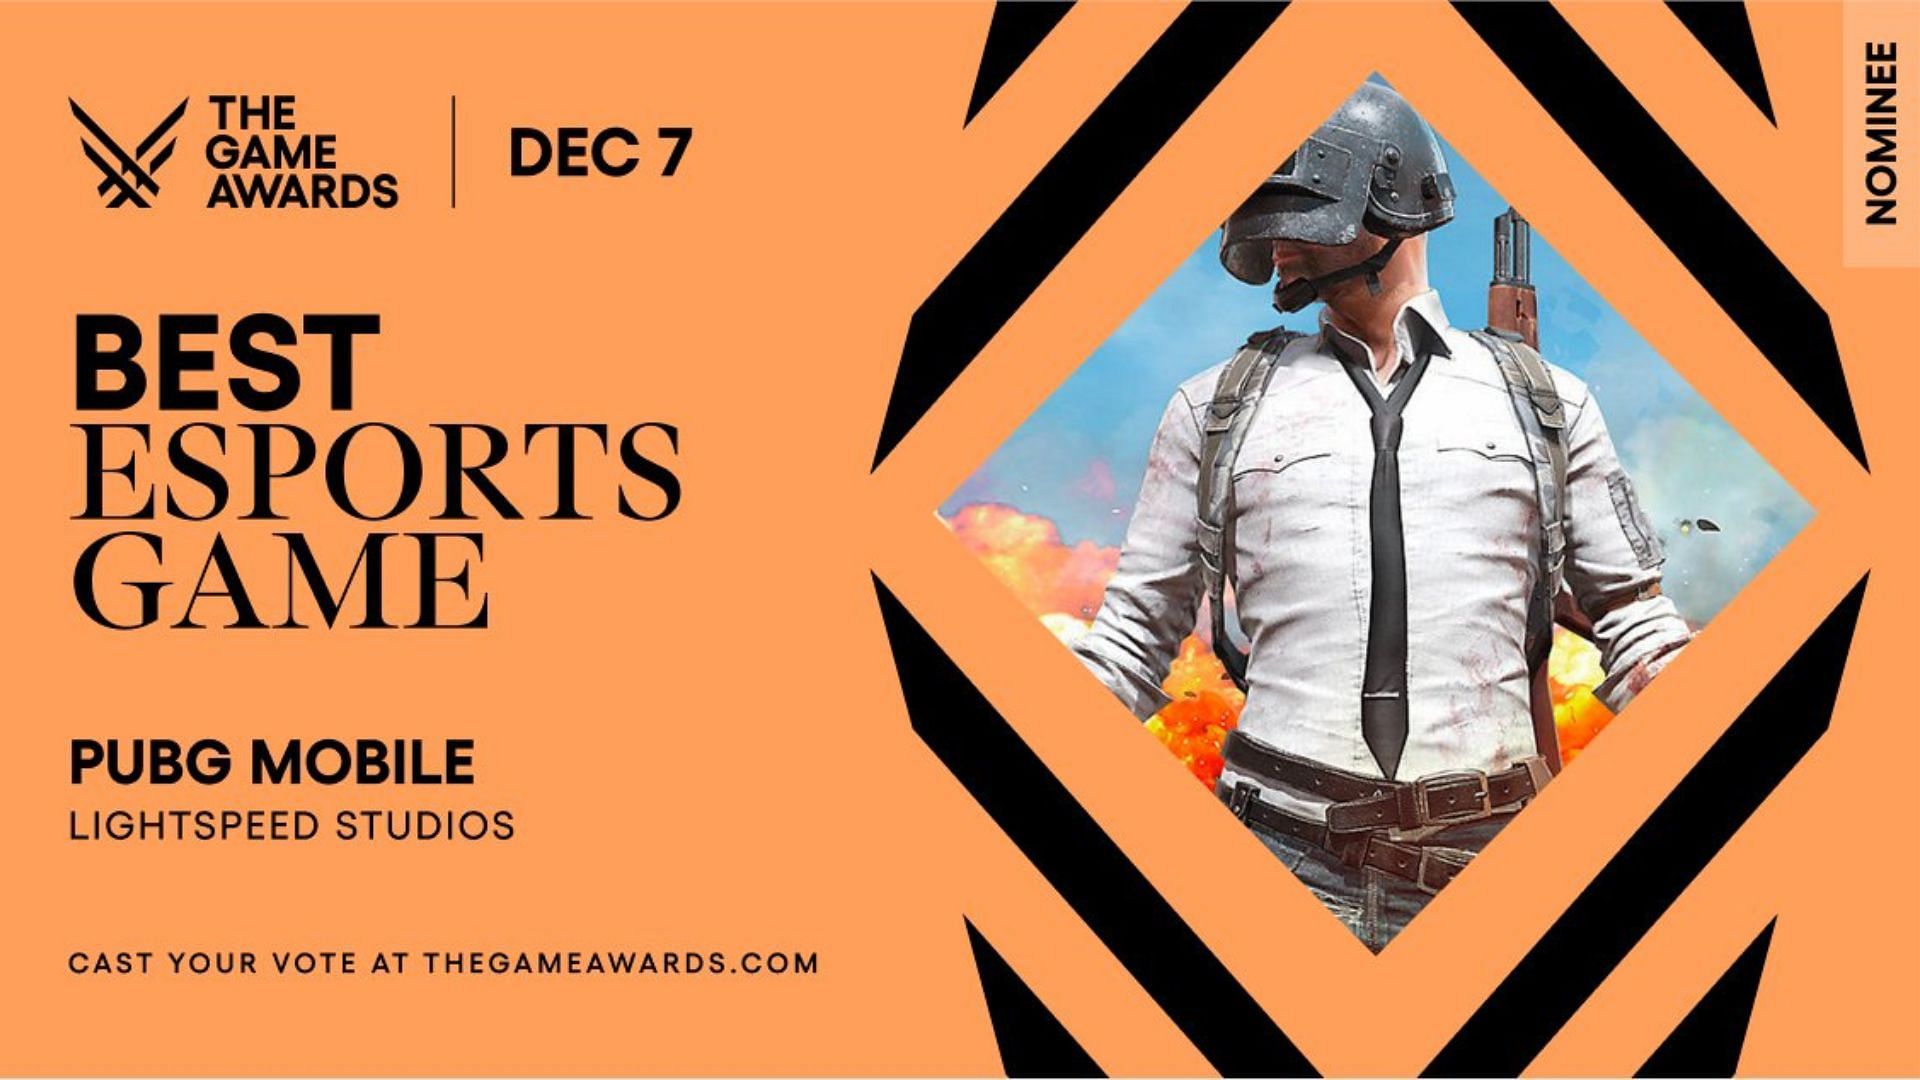 PUBG Mobile has been nominated for Best Esports Game at The Game Awards (Image via The Game Awards)